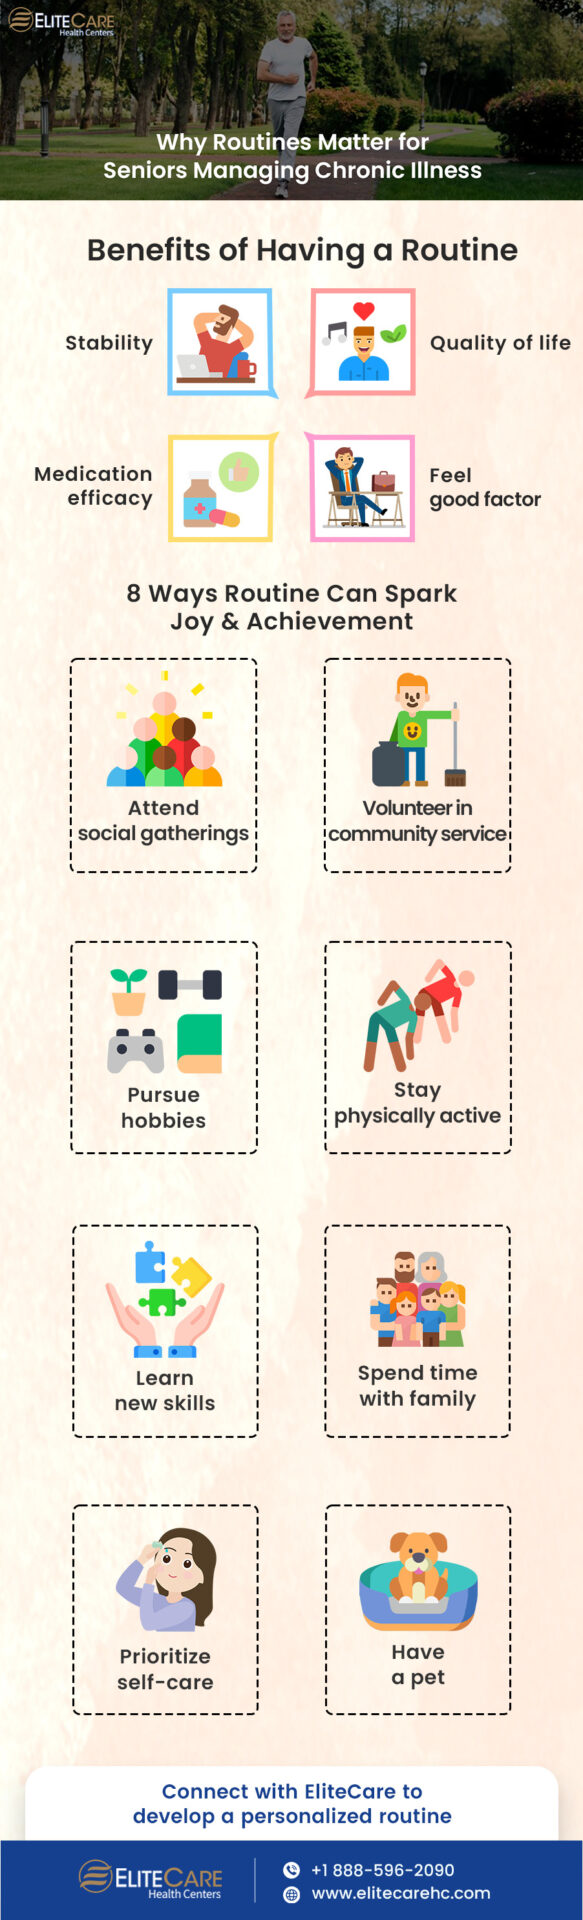 Why Routines Matter for Seniors Managing Chronic Illness | Infographic